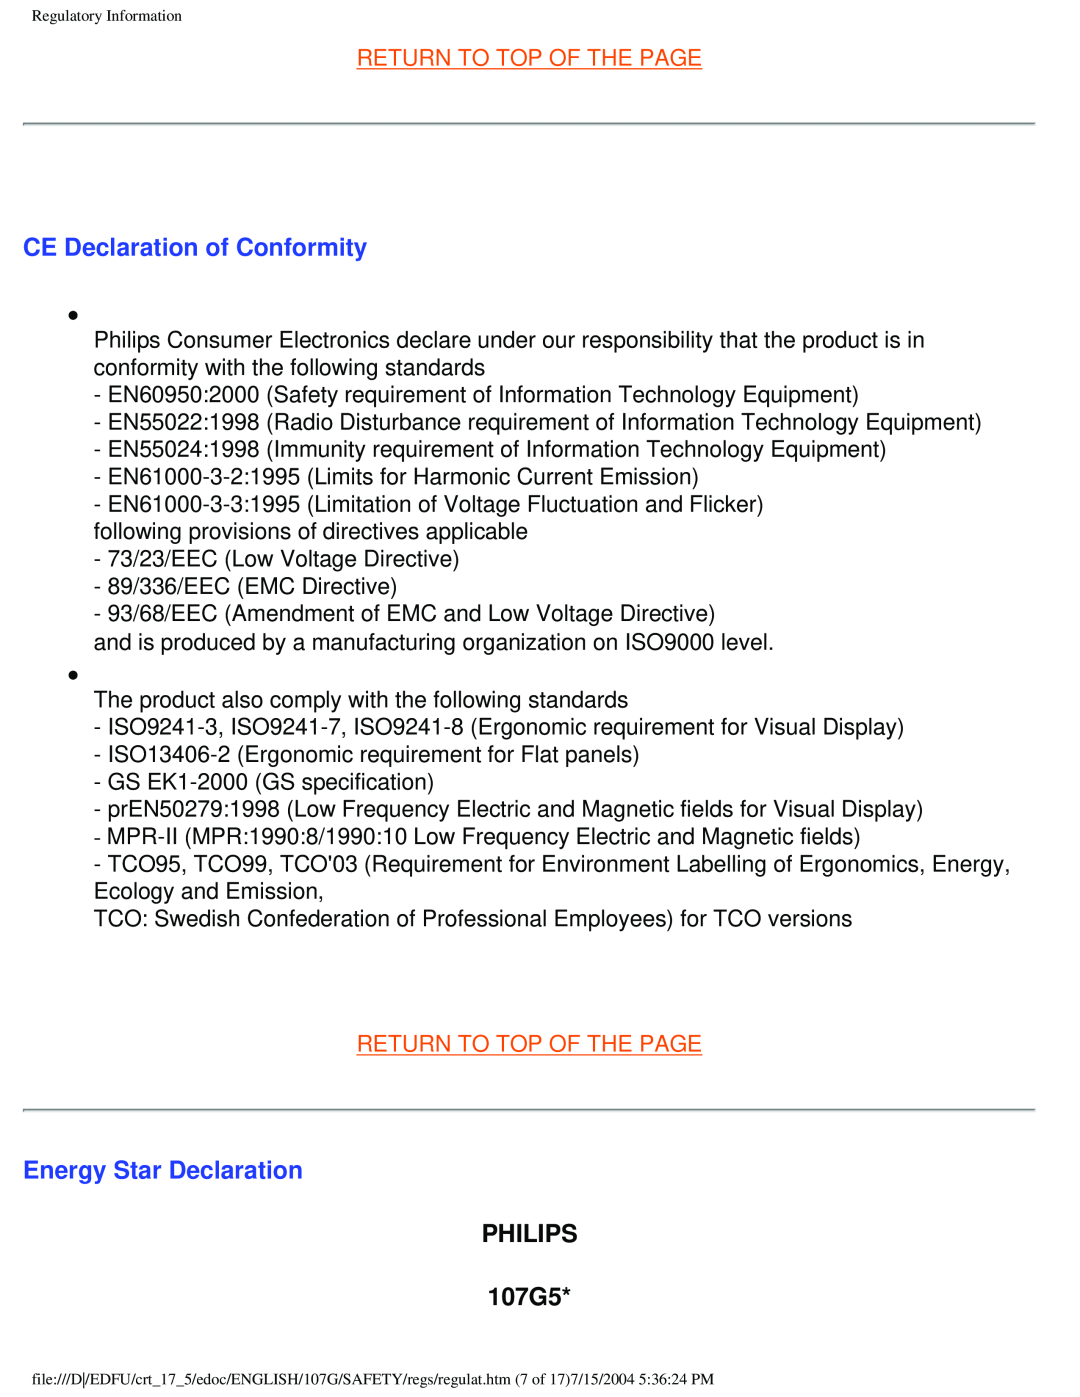 Philips user manual CE Declaration of Conformity, Energy Star Declaration, PHILIPS 107G5, Return To Top Of The Page 